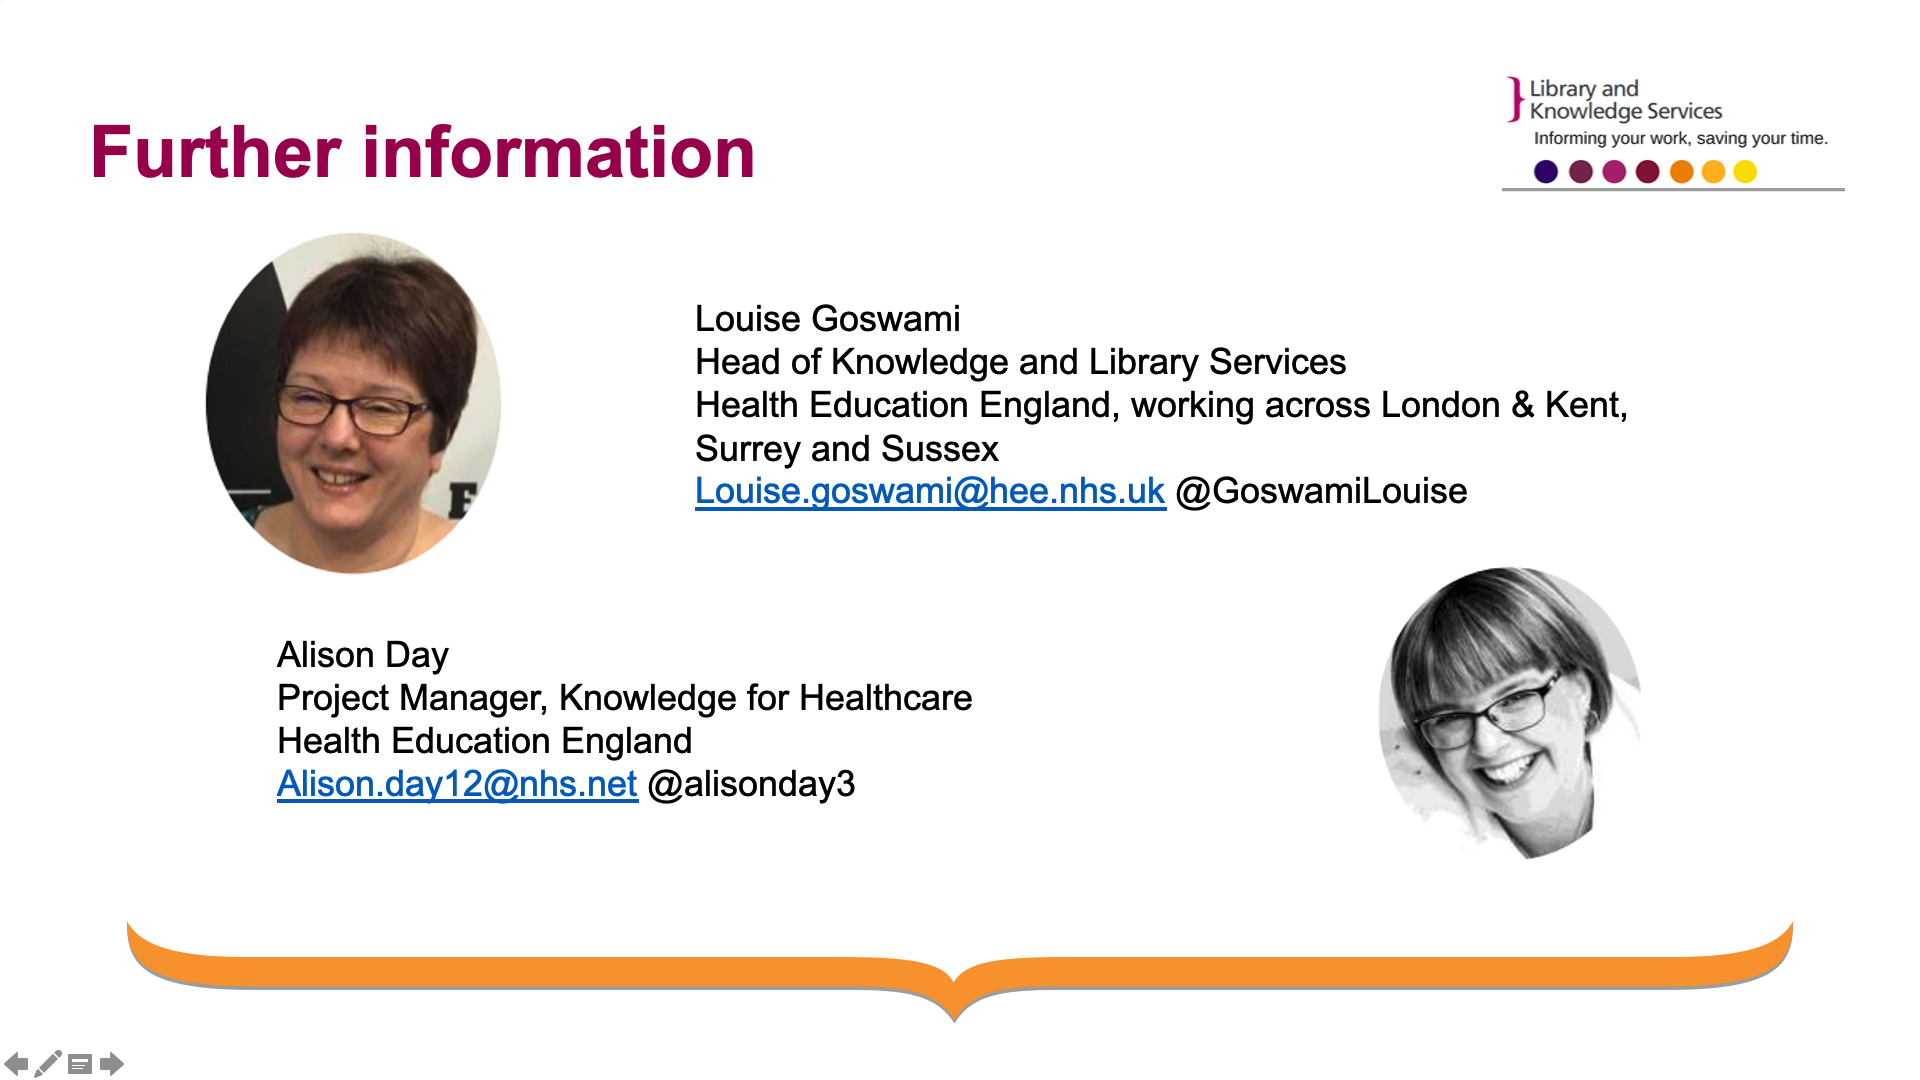 Slide 13: This contains the contact information for Louise Goswami and Louise Day. Louise Goswami- Head of Knowledge and Library Services  Health Education England, working across London & Kent, Surrey and Sussex Louise.goswami@hee.nhs.uk @GoswamiLouise. Alison Day - Project Manager, Knowledge for Healthcare Health Education England  Alison.day12@nhs.net @alisonday3